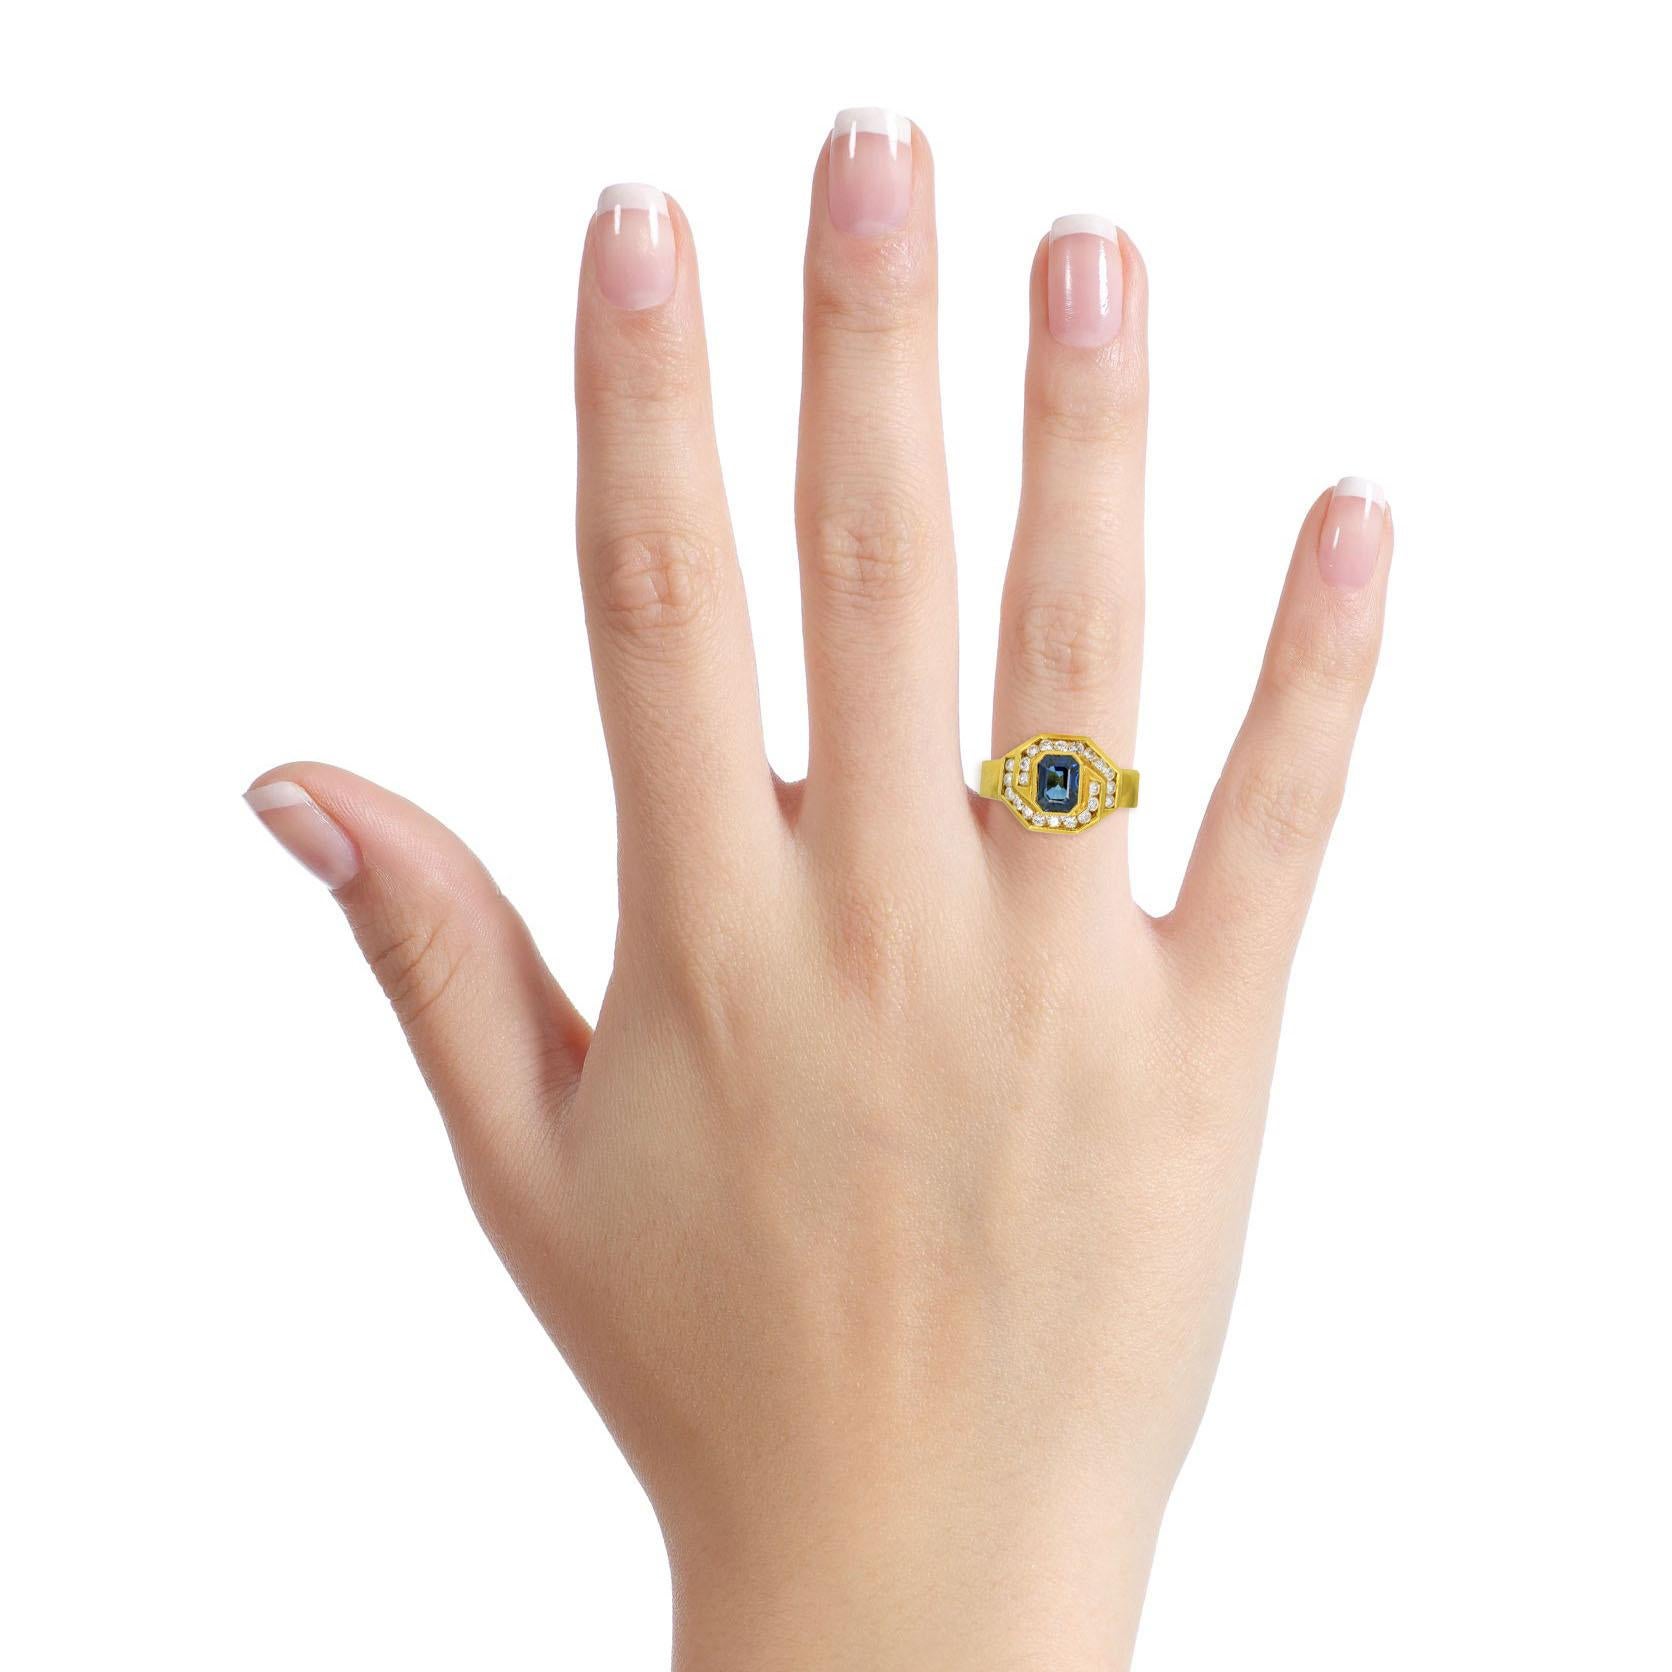 Damiani sapphire and diamond cocktail ring in 18-karat yellow gold. Polished metal setting bezel set with an emerald cut blue sapphire, and numerous round cut diamonds. Made in Italy. 

Size, 7
Height, 6mm
Width, 11.5mm
Depth, 1.5mm
Weight, 7